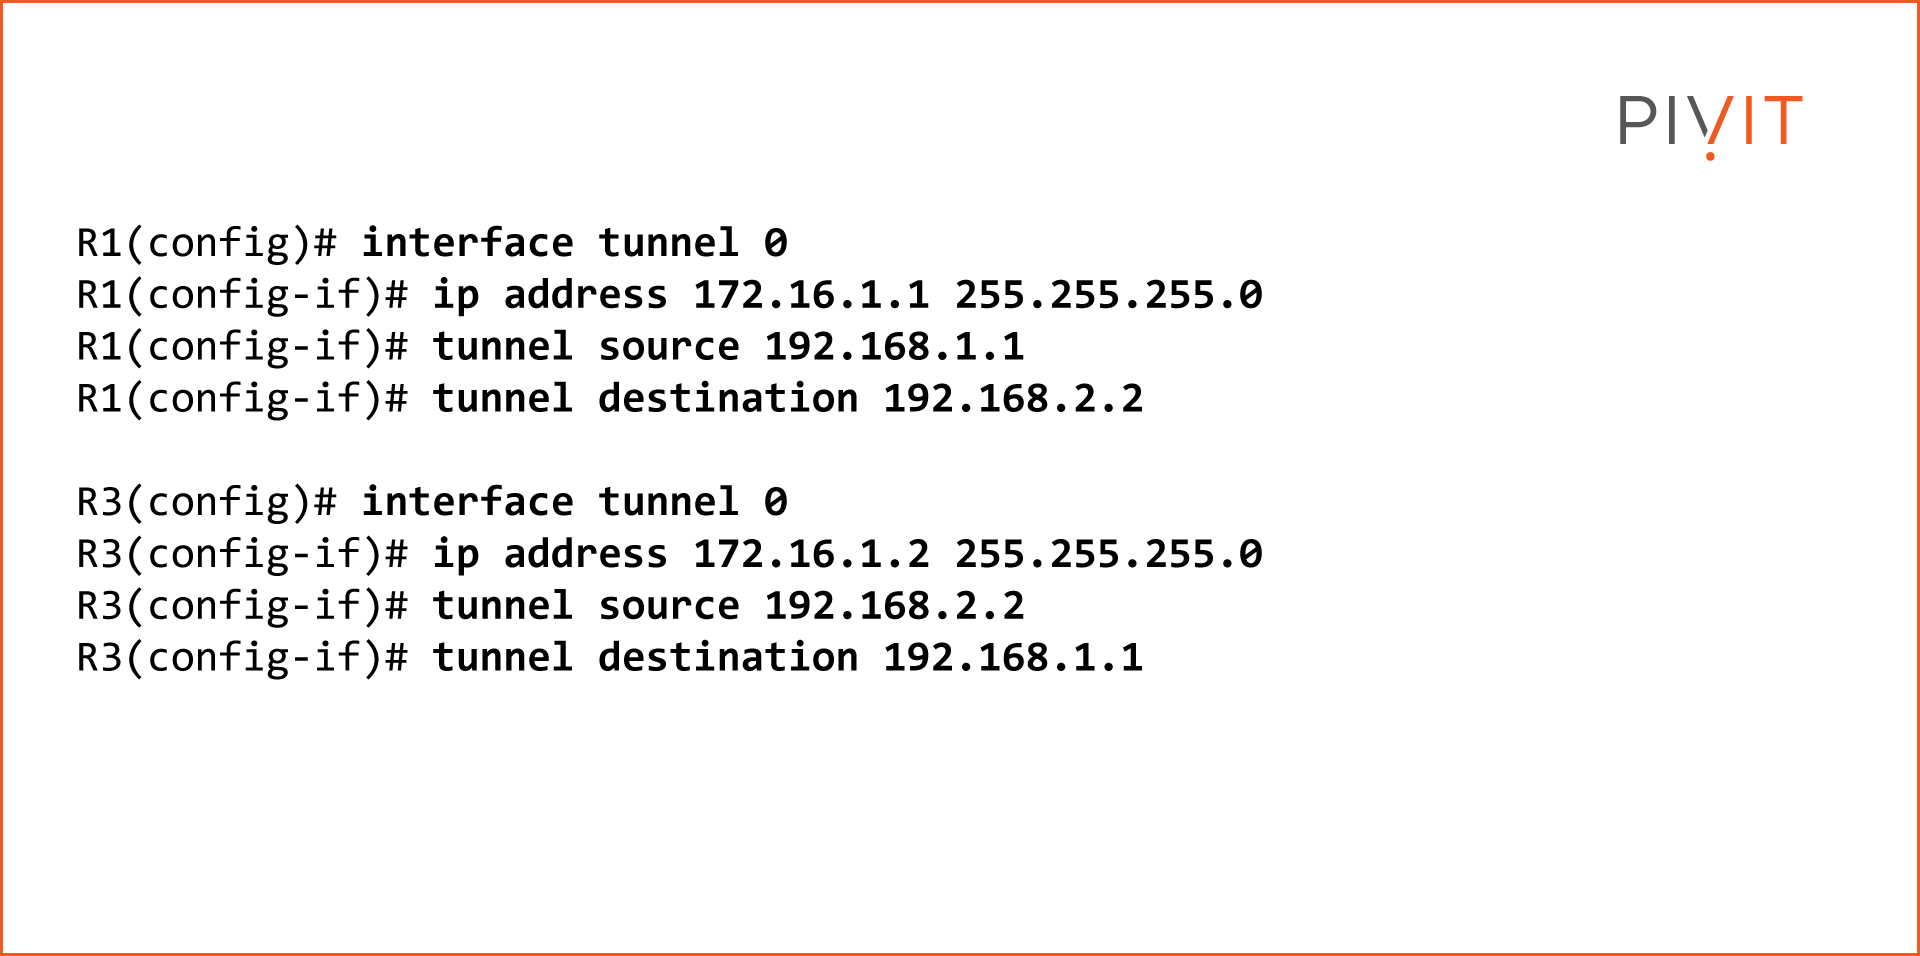 GRE tunnel router configuration commands